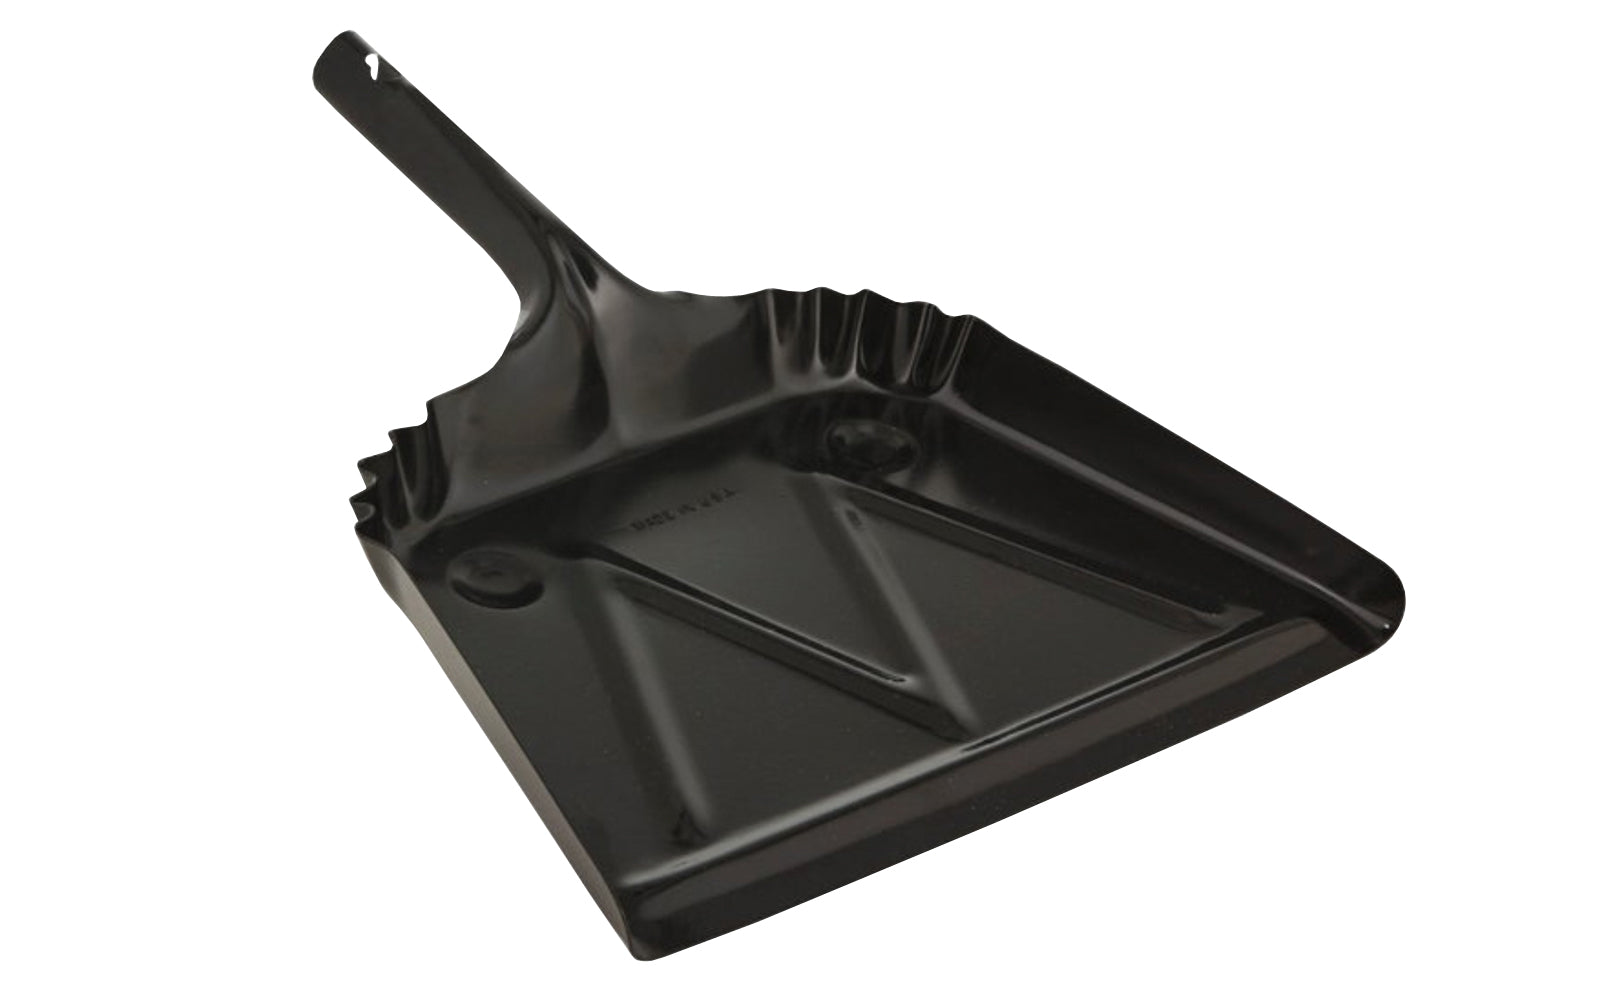 USA-made 12" metal dust pan. Black metal janitor dust pan is 20 gauge steel. Baked enamel finish is durable with a beveled edge. Corrugated ribs add to strength. The depth of the back of the dust pan is 1-1/2" deep. Hang up hole in handle for storage. General purpose cleaning & the workshop area.  Made in USA.